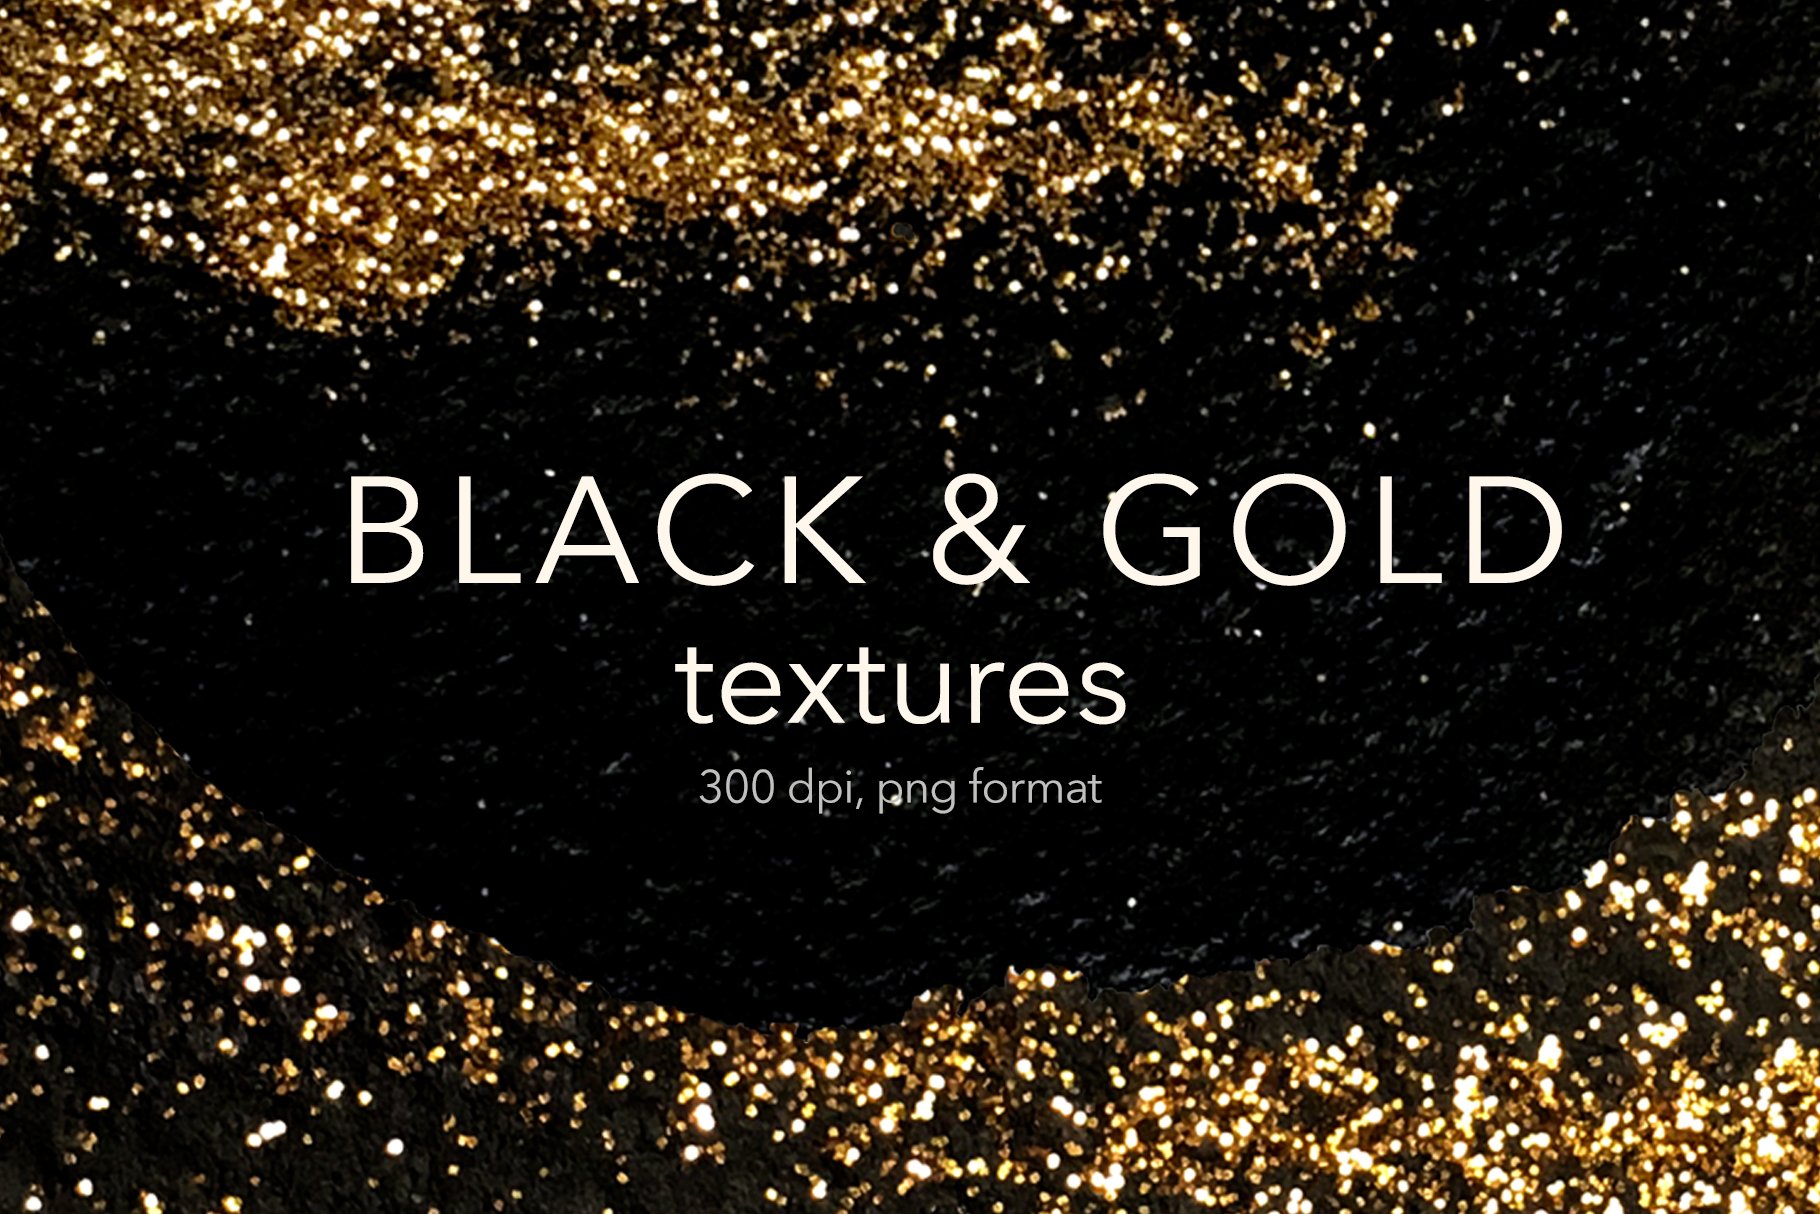 Black & Gold textures cover image.